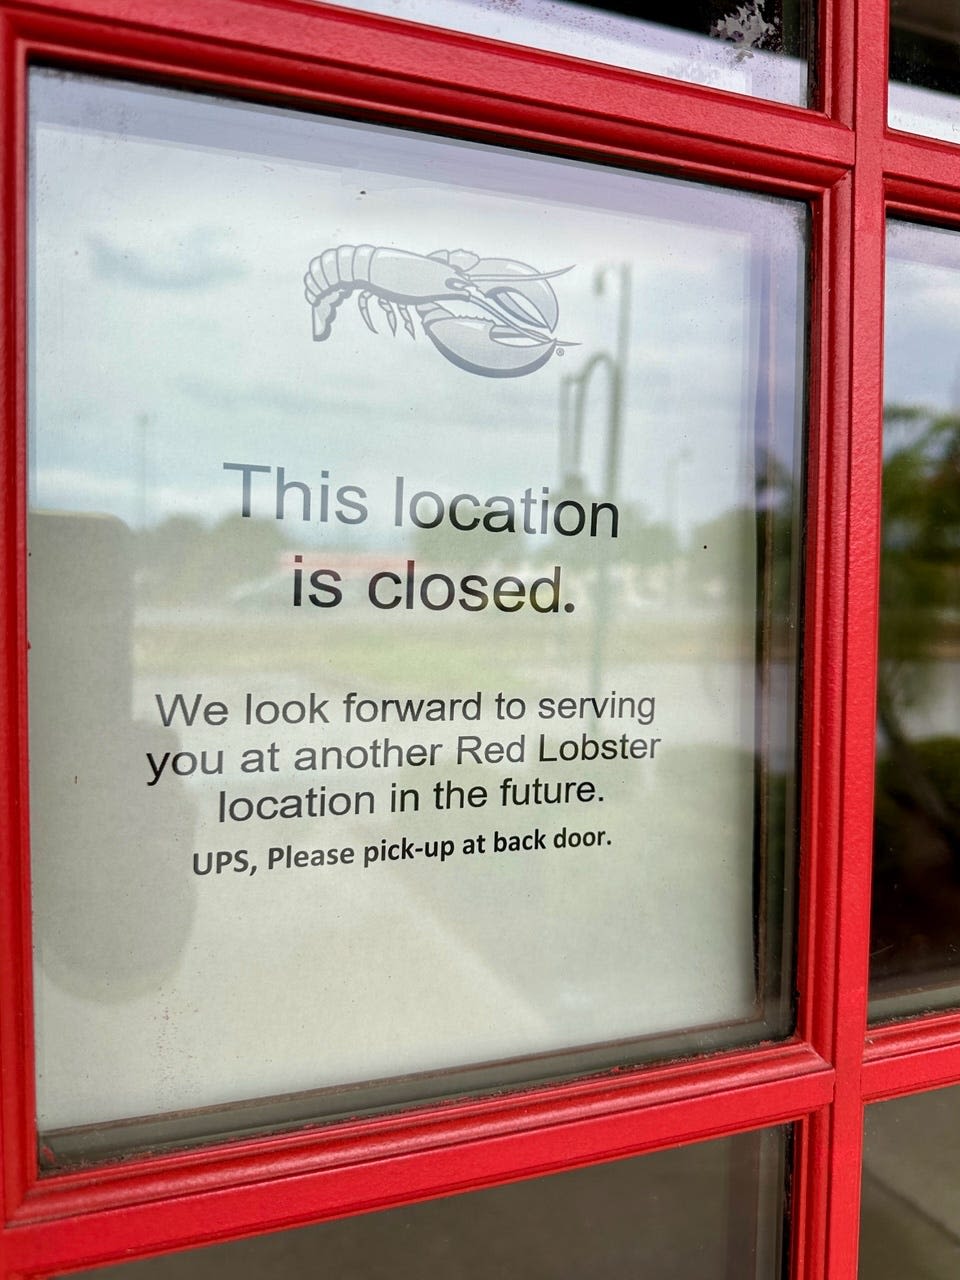 Two more Texas Red Lobster locations close amid bankruptcy: See updated list